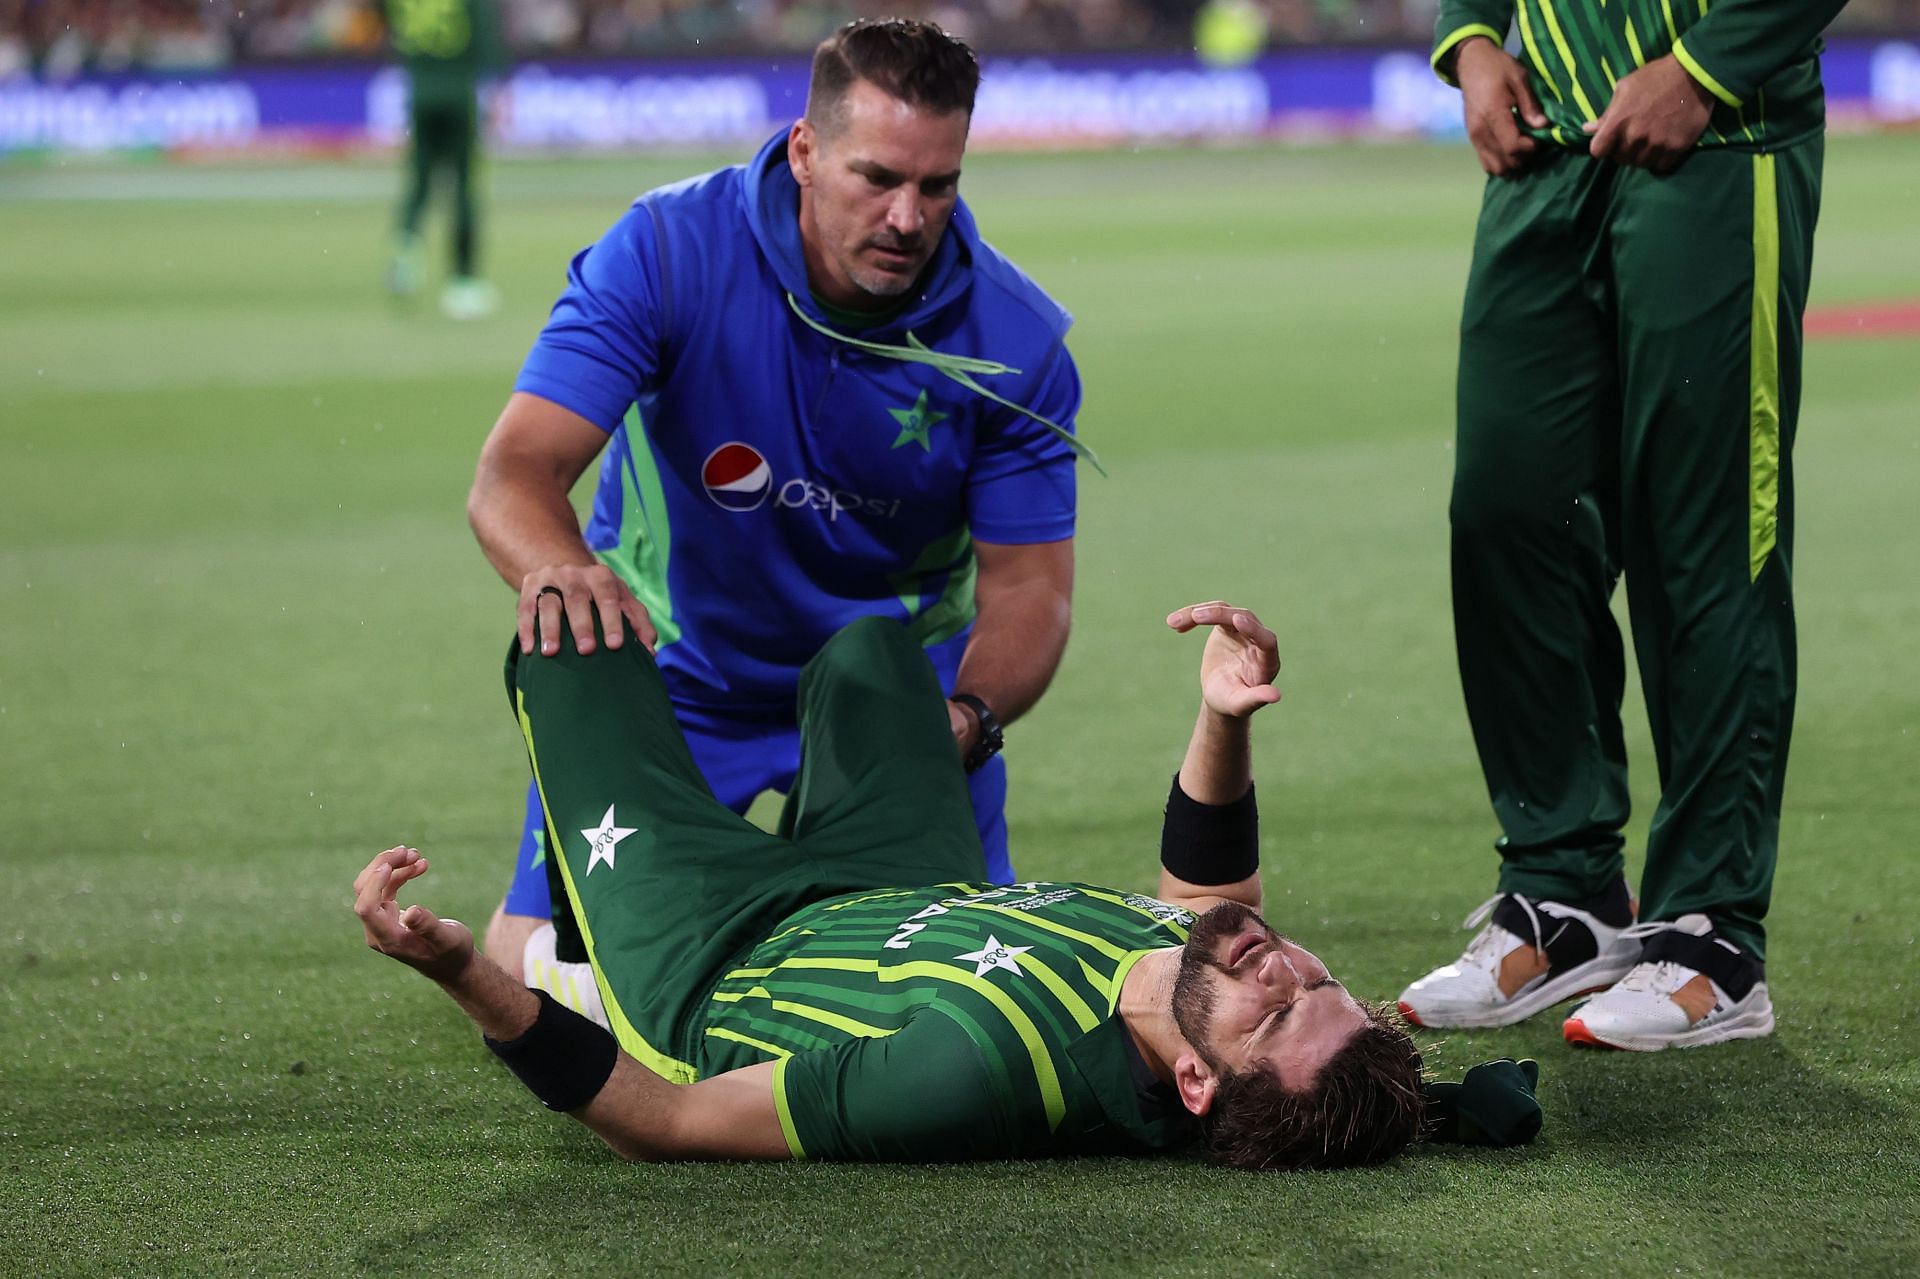 T20 World Cup 2022: “Would have given him local anesthetic” - Shoaib Akhtar reckons Pakistan management showed lack of awareness while dealing with Shaheen Afridi injury